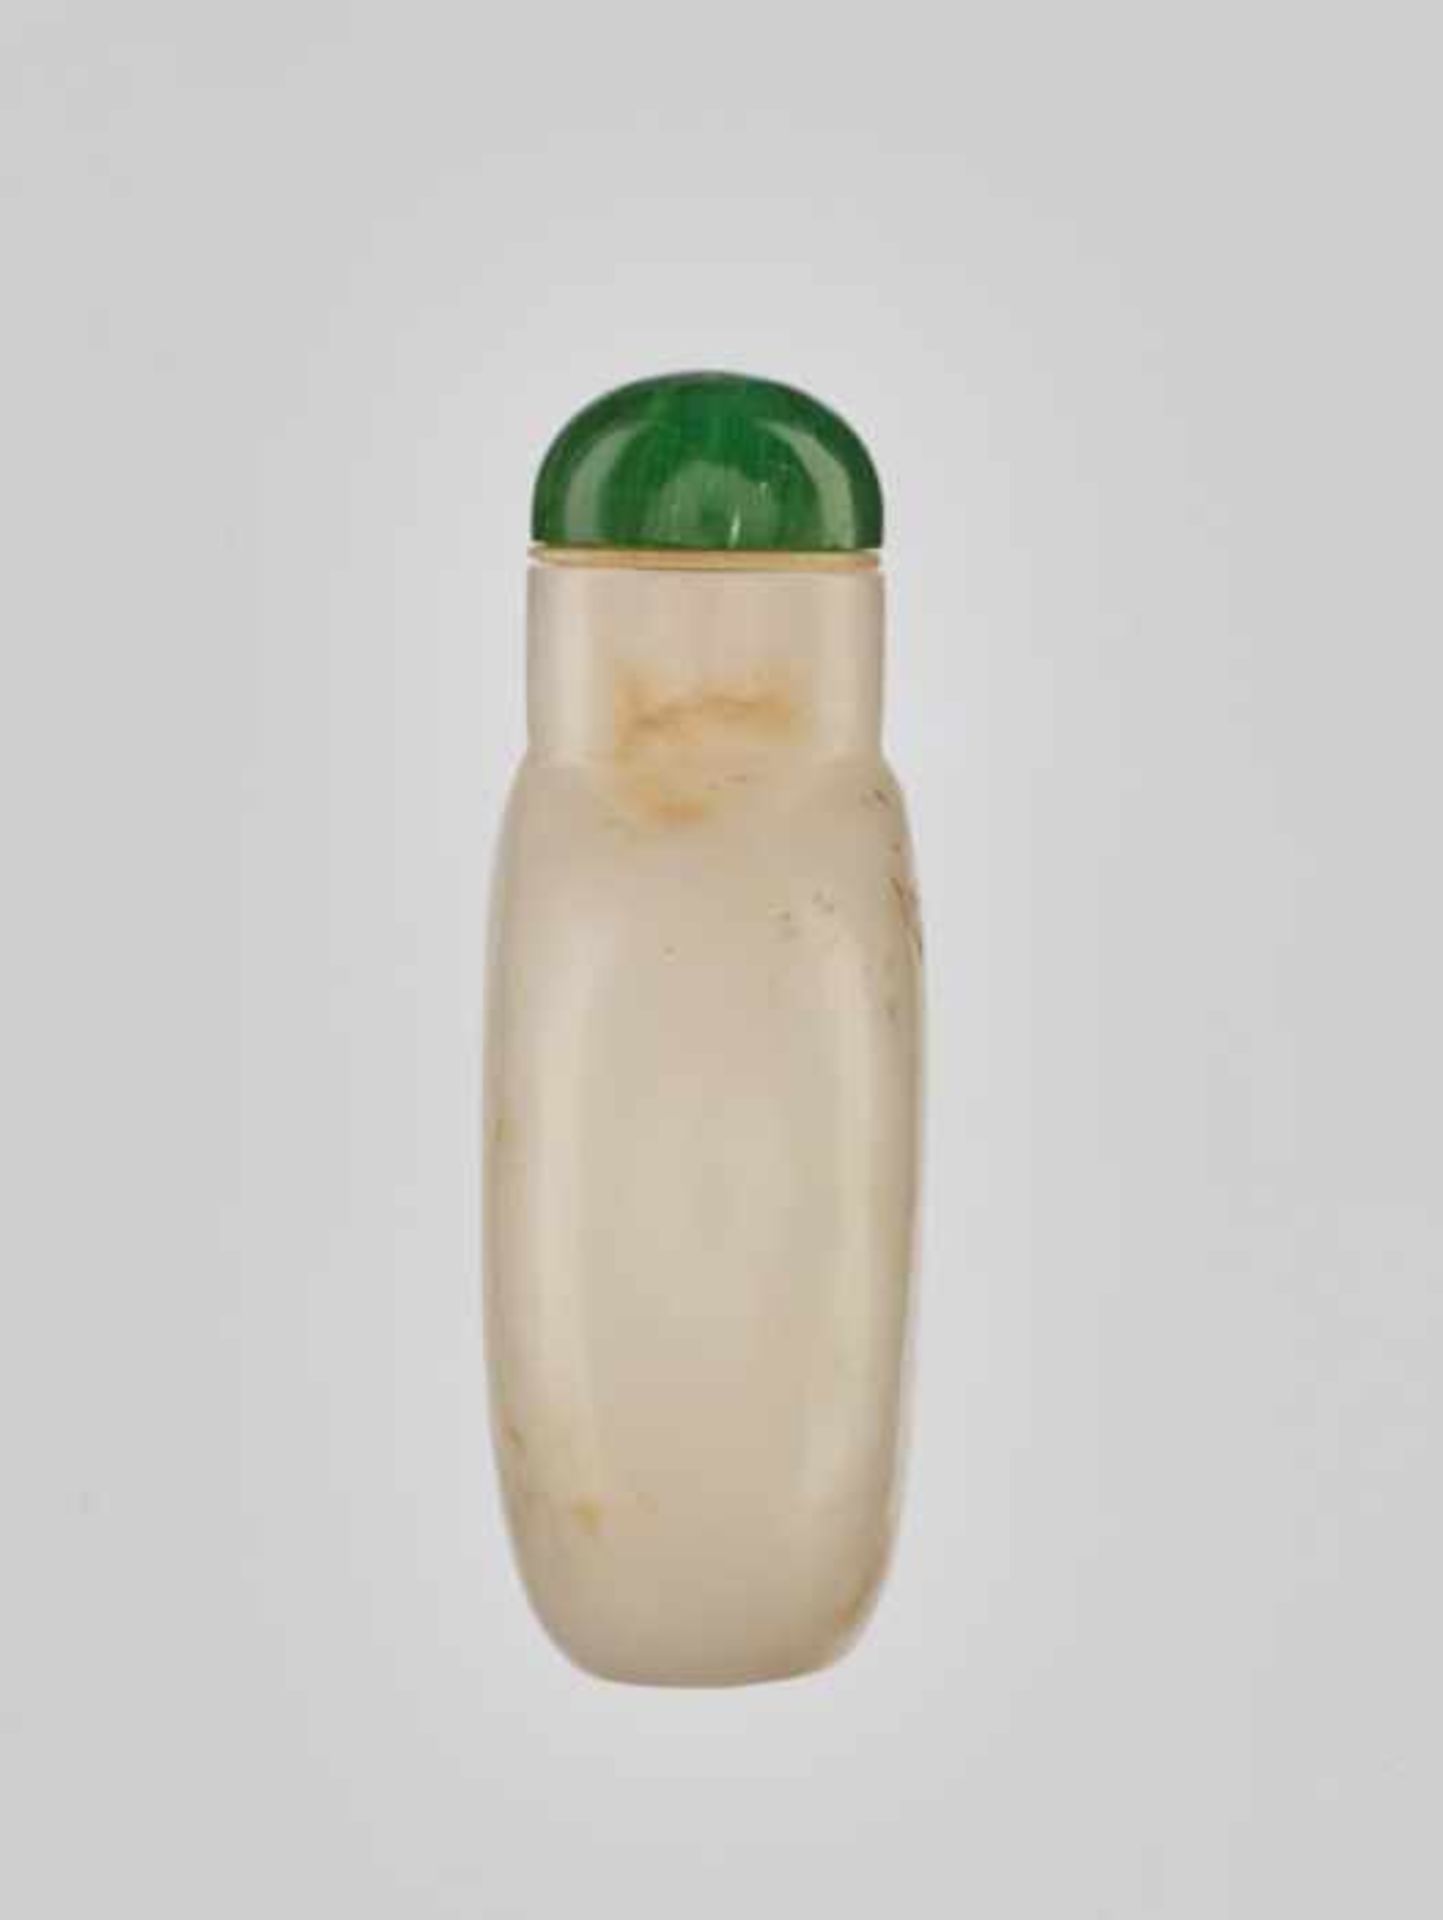 A PLAIN WHITE AND RUSSET CALCITE BOTTLE, 1780-1860 Opaque white calcite with russet streaks and - Image 4 of 6